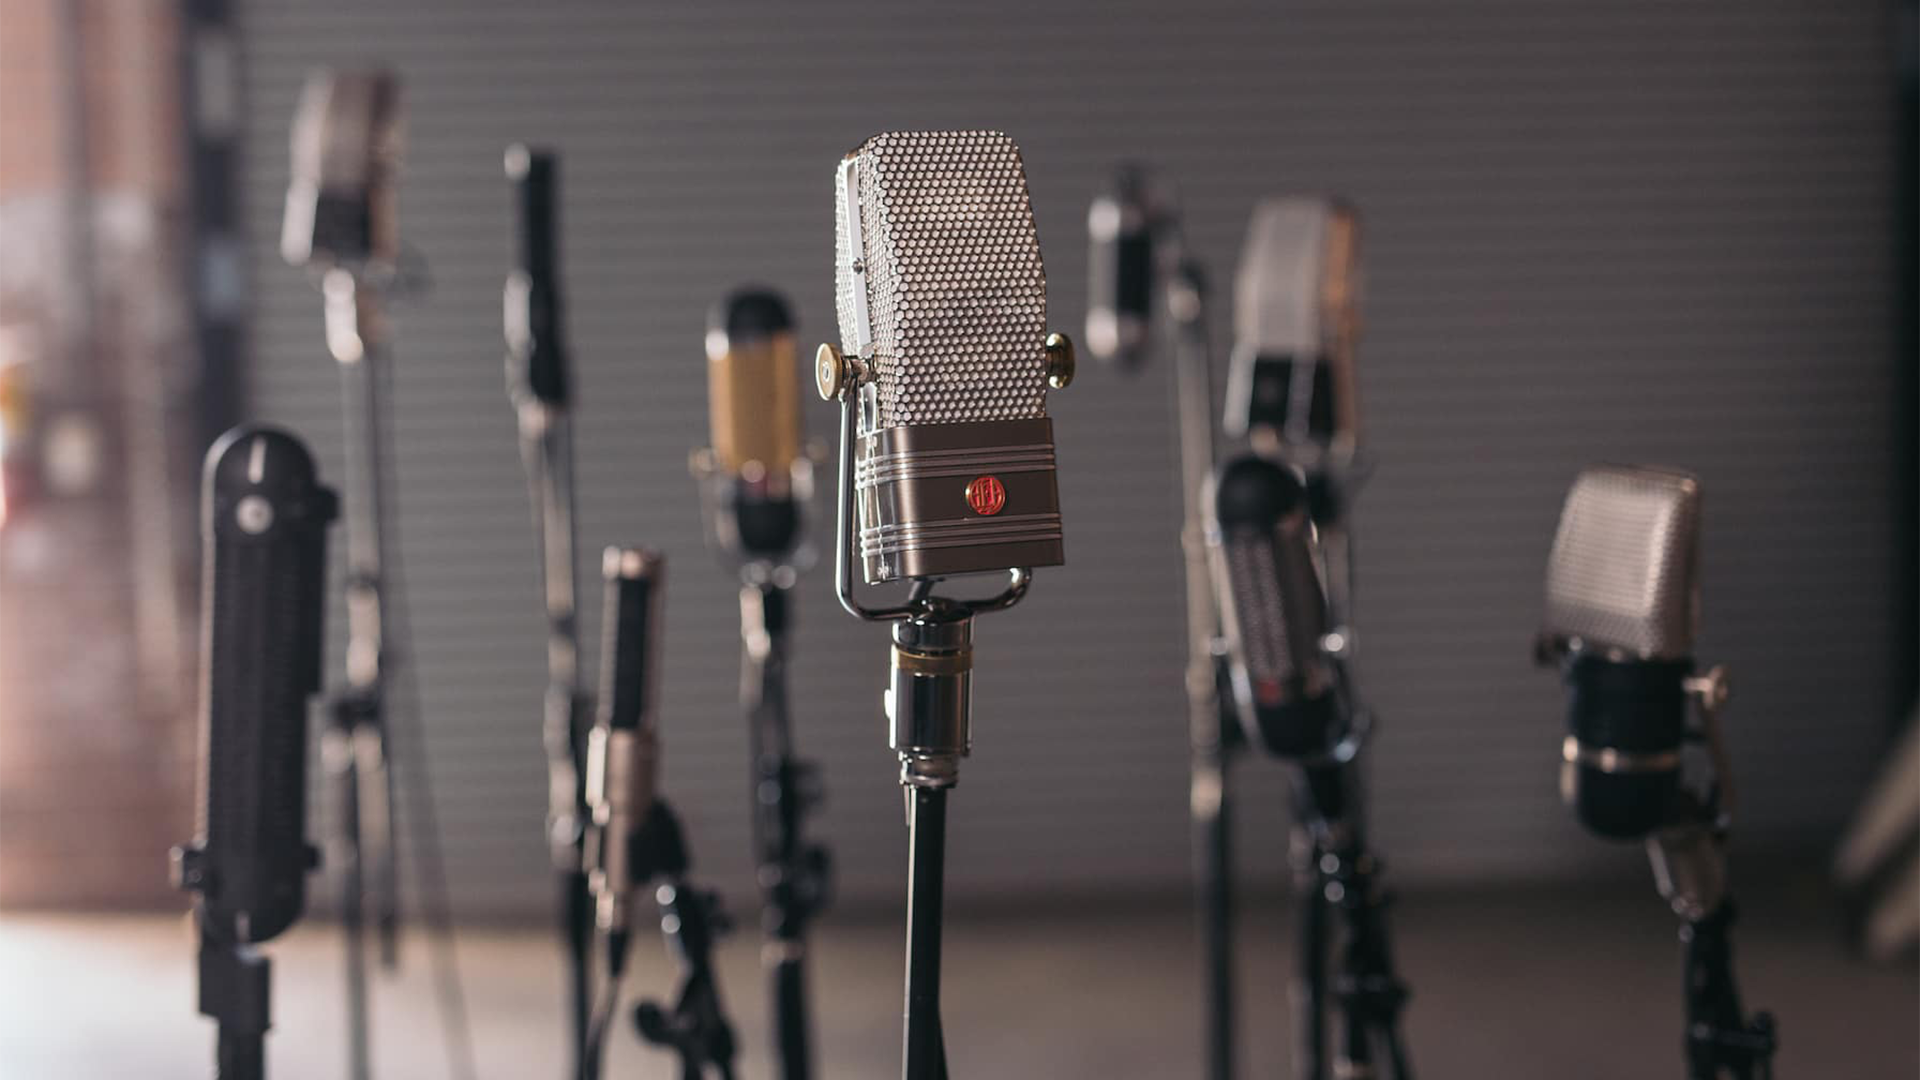 Ribbon Microphones: The Ideal Choice for Professional Audio Recording - W3Tekno